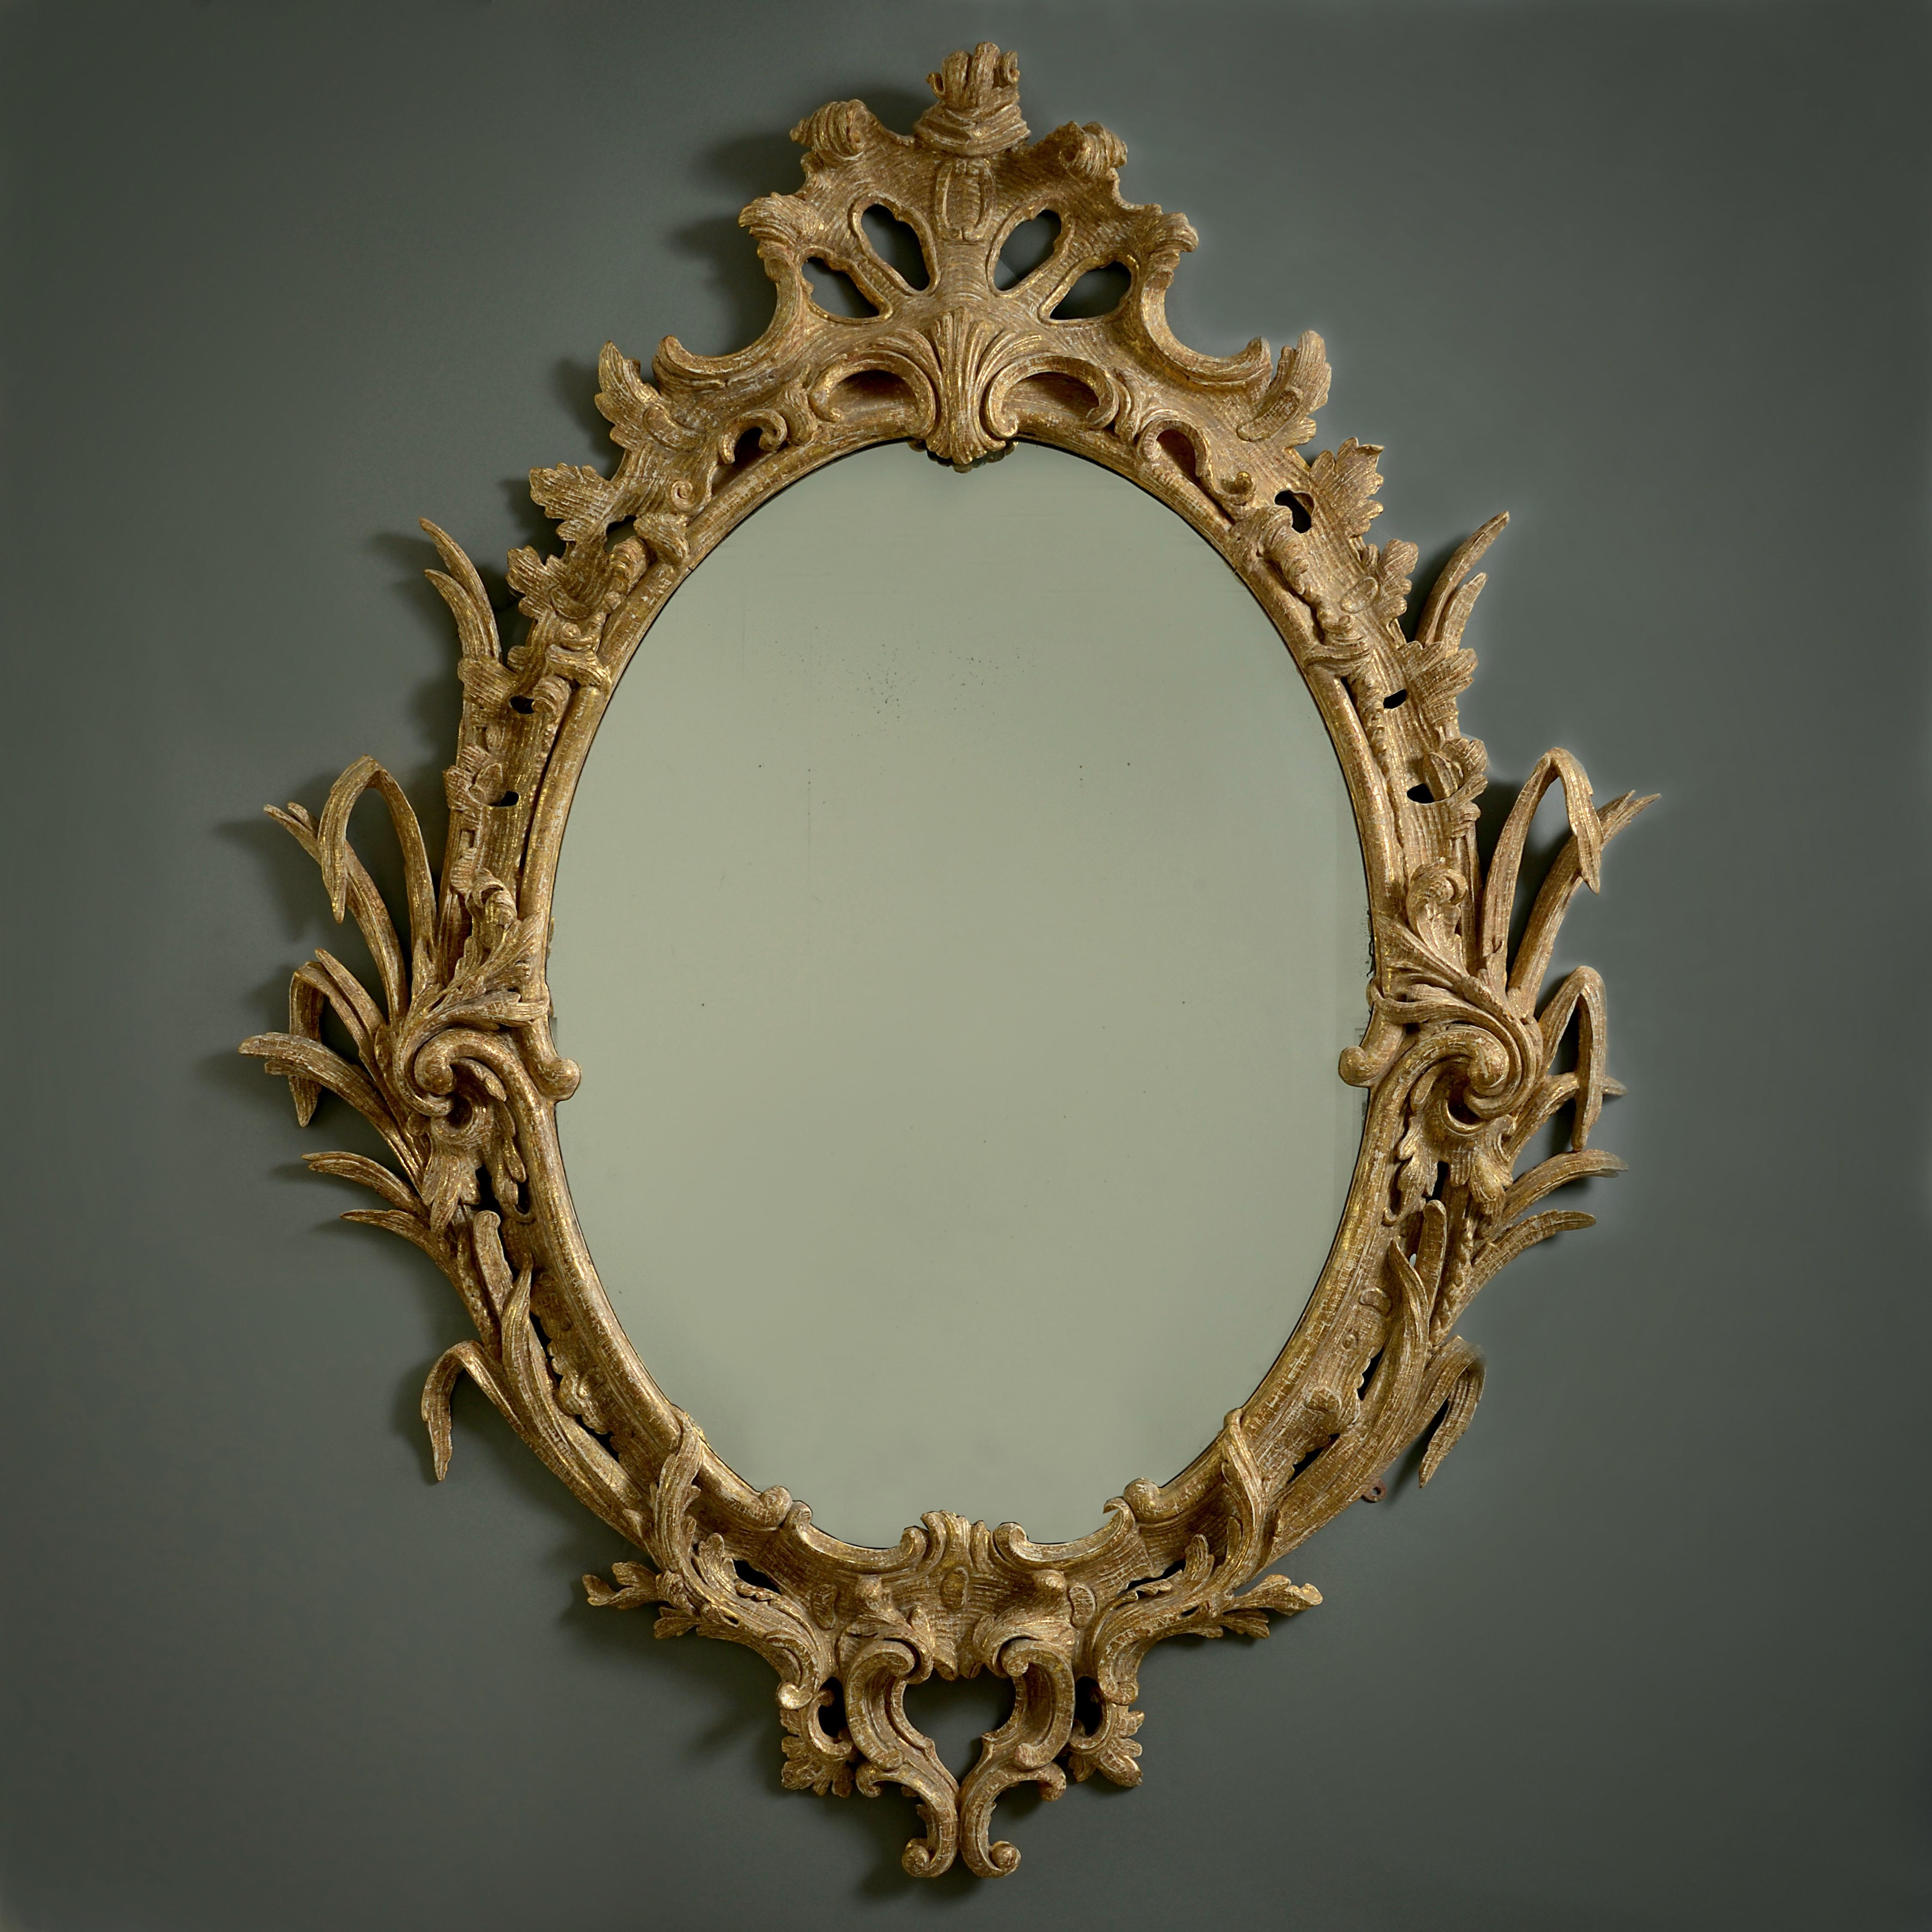 A fine George III carved gilt-wood oval mirror, circa 1765.

The pierced frame boldly carved with reeds, scrolls and rocailles. The oval mercury-silvered plate a 19th century replacement.